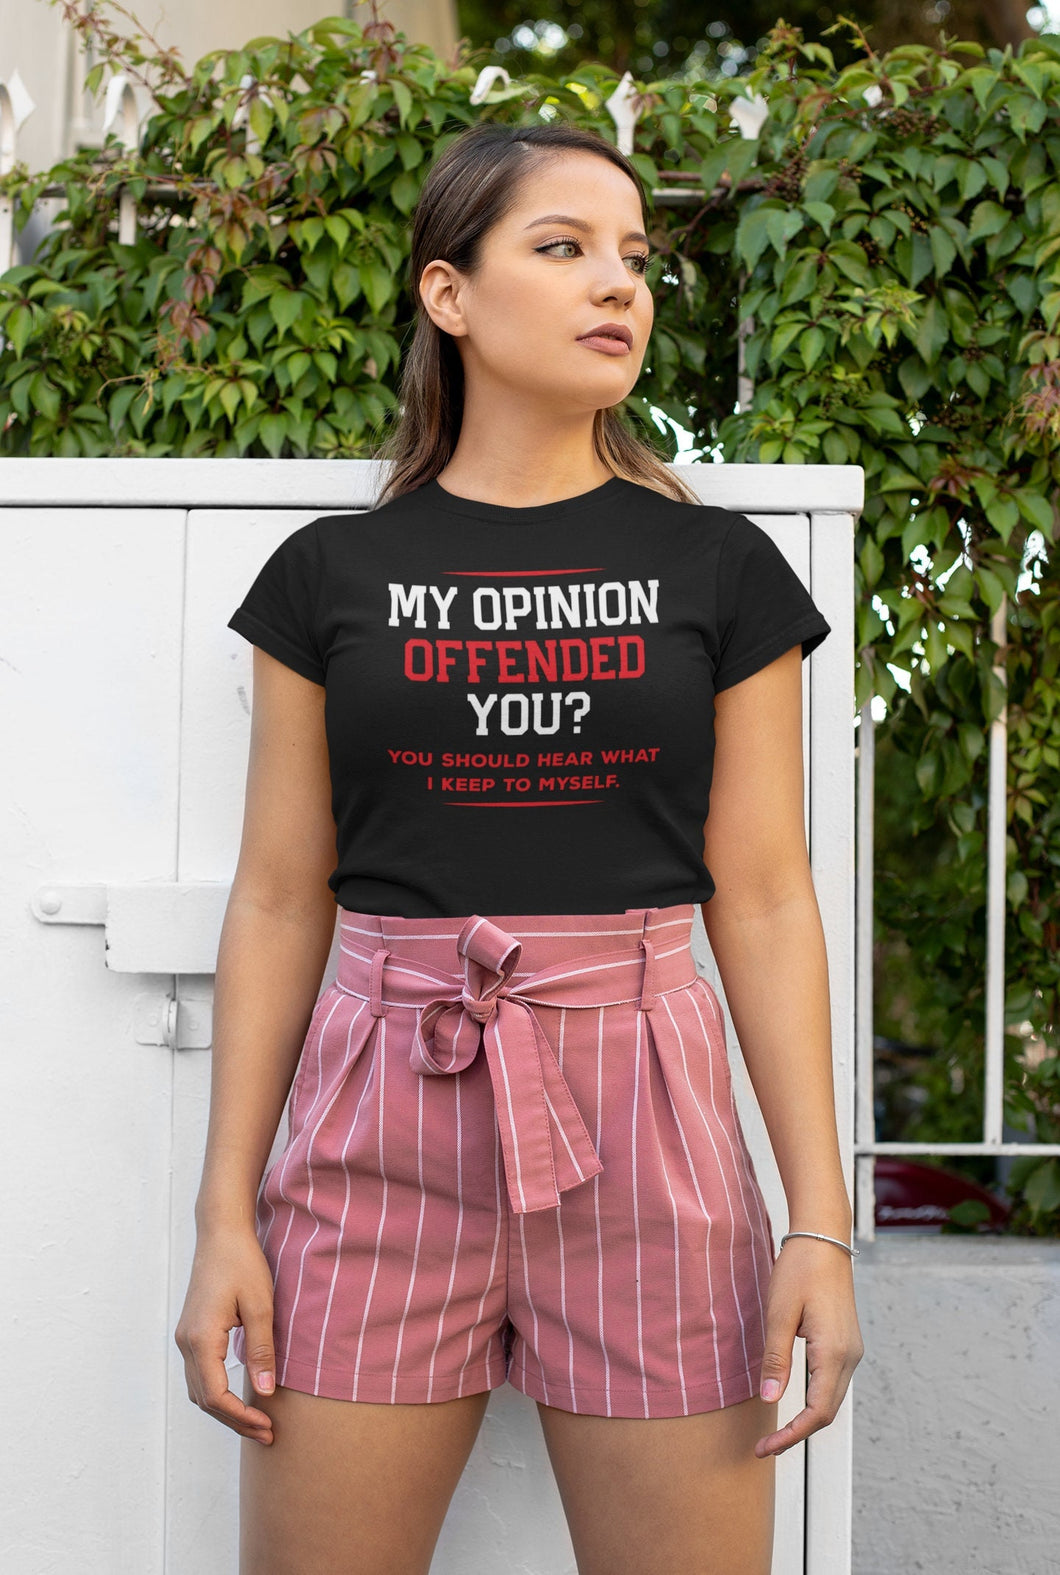 My Opinion Offended You Shirt, What I Keep To Myself Shirt, Opinion Shirt, Offended Shirt